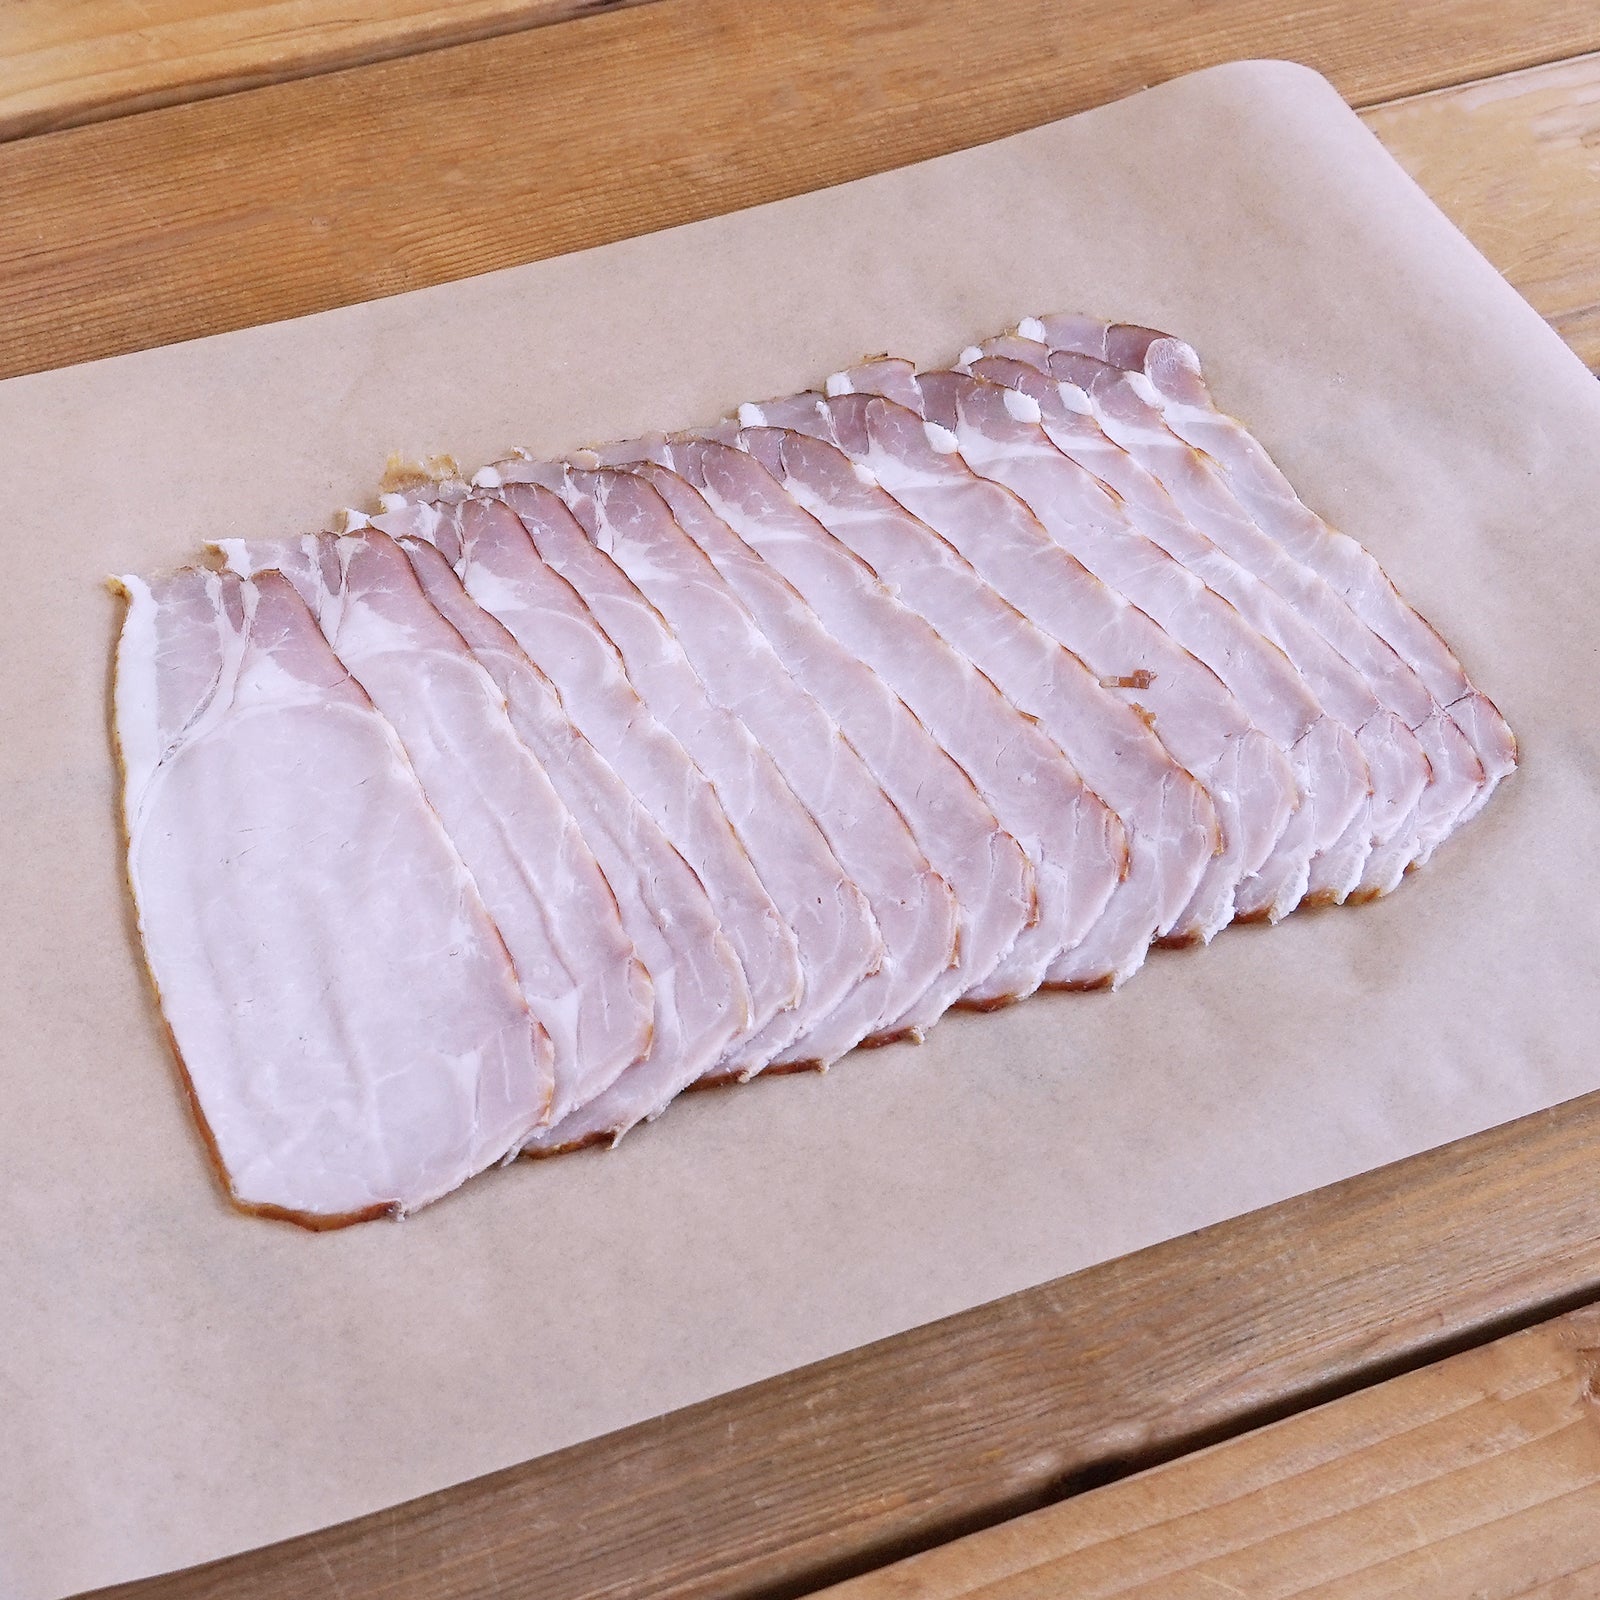 Curated Set of All-Natural Free-Range Bacon (6 Types, 12 Items, 2.4kg) - Horizon Farms